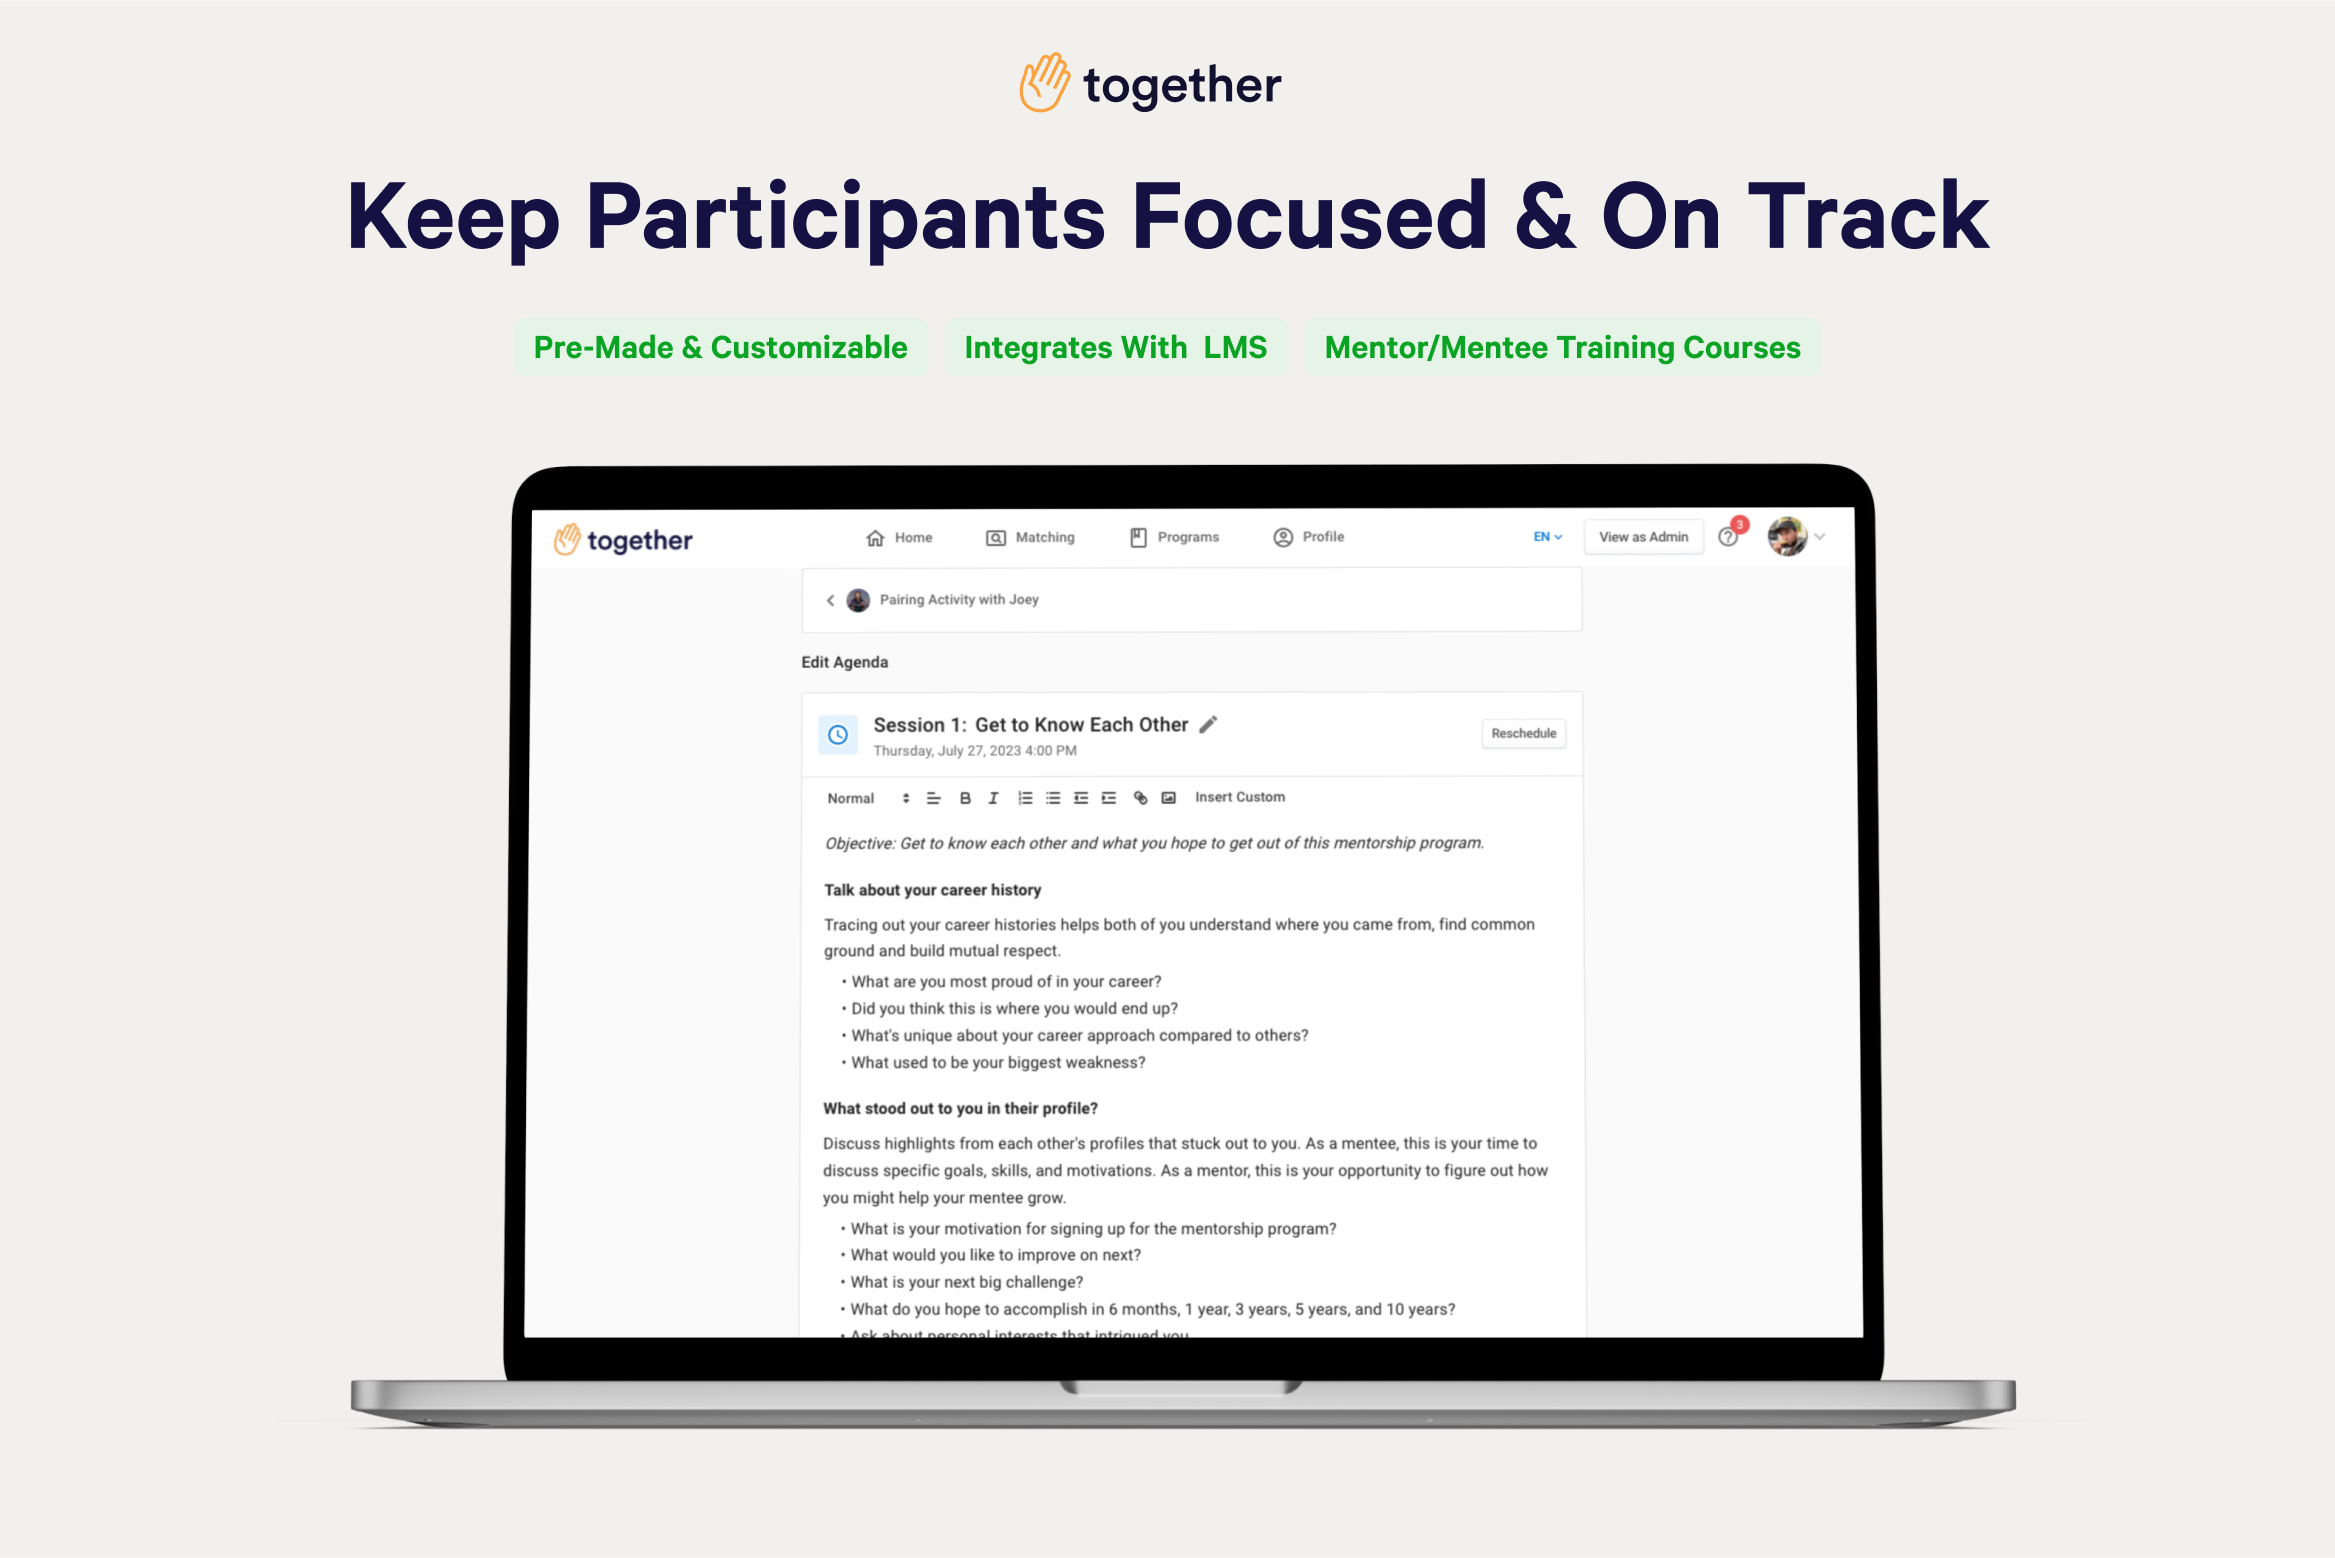 Together Mentoring Software - Guided Experience: Together provides customizable session agendas to positively guide participant's conversations